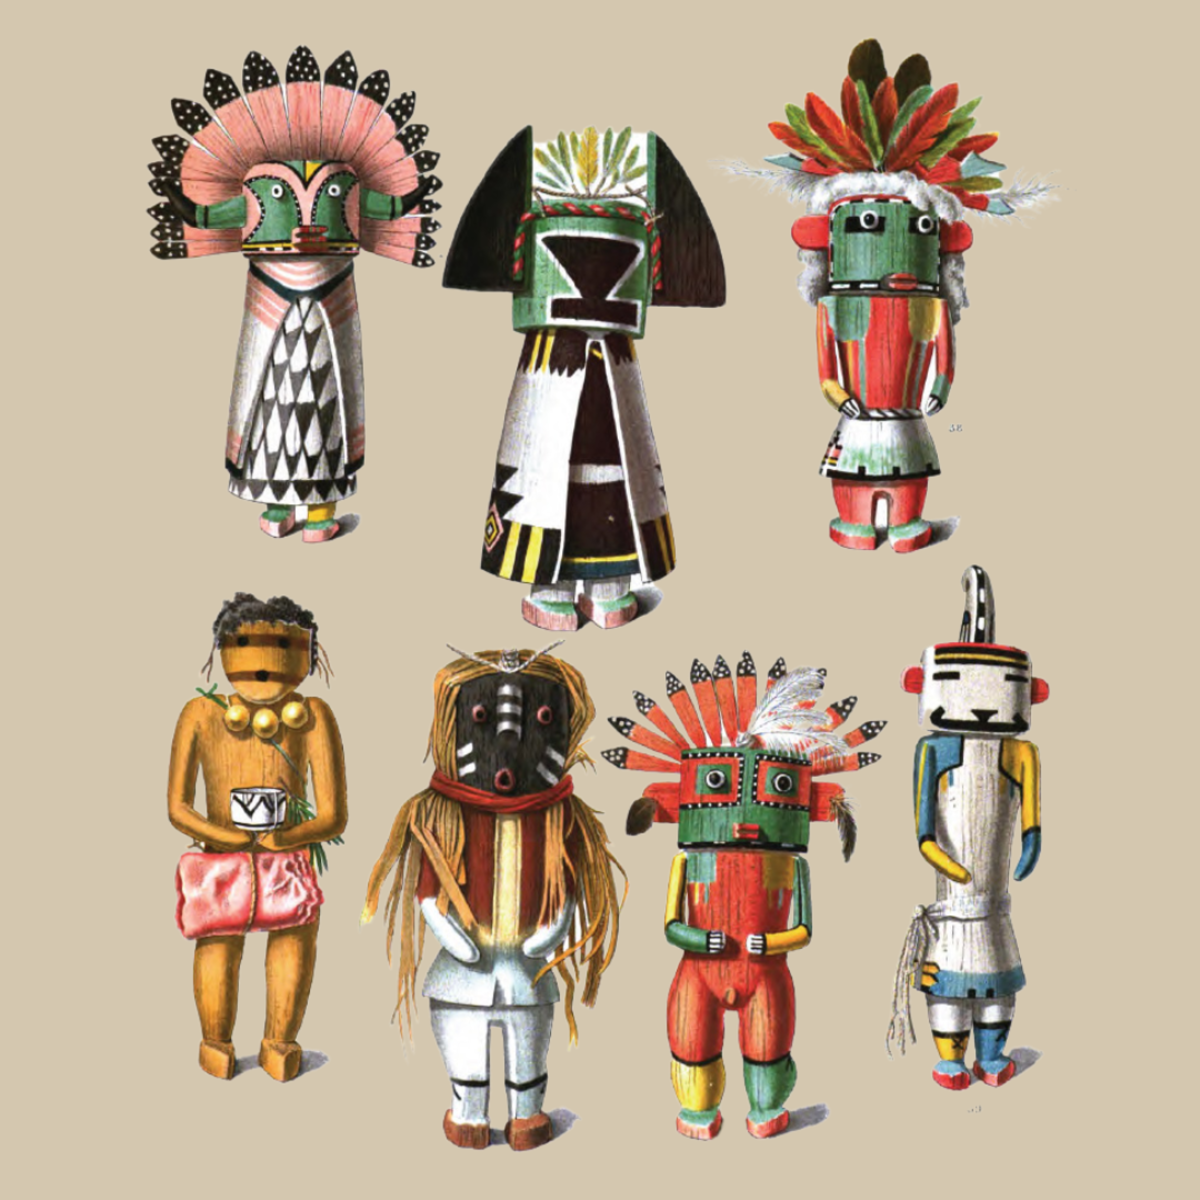 Drawings of kachina dolls from an 1894 anthropology book by Jesse Walter Fewkes. The Hopi call them katsinas. They are the most important part of the sacred ceremonies.